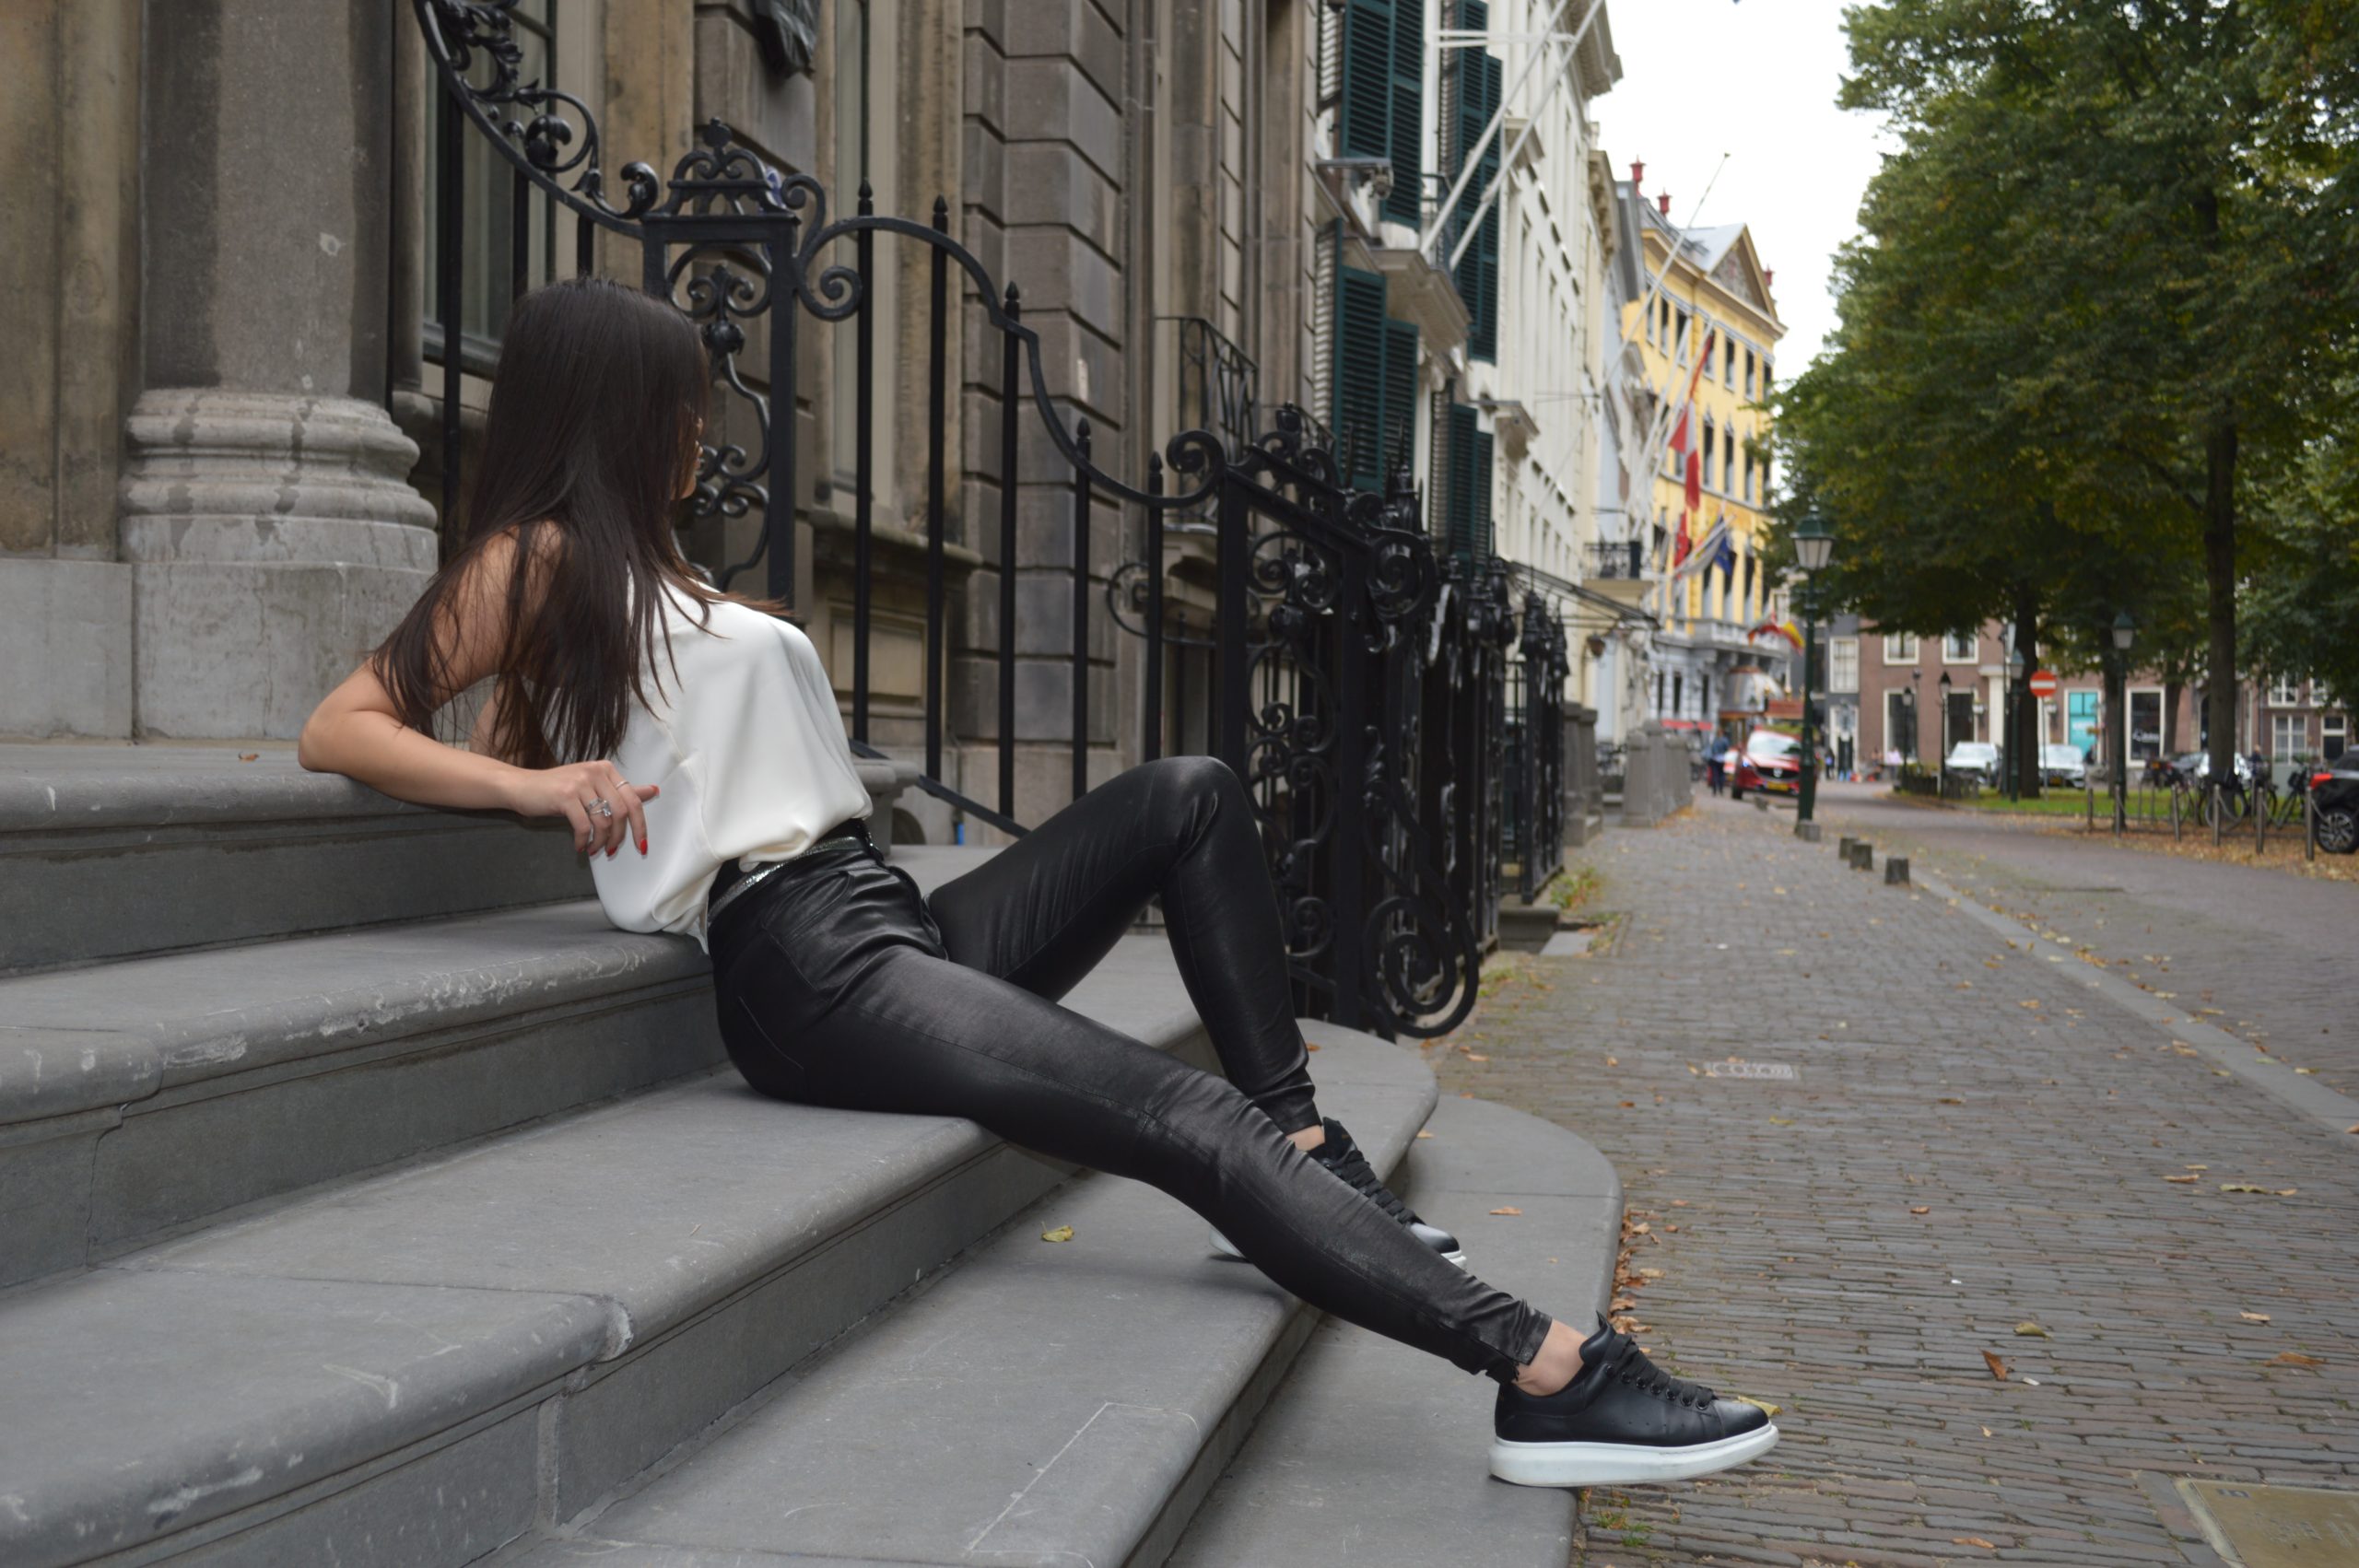 Women with leather pants on street